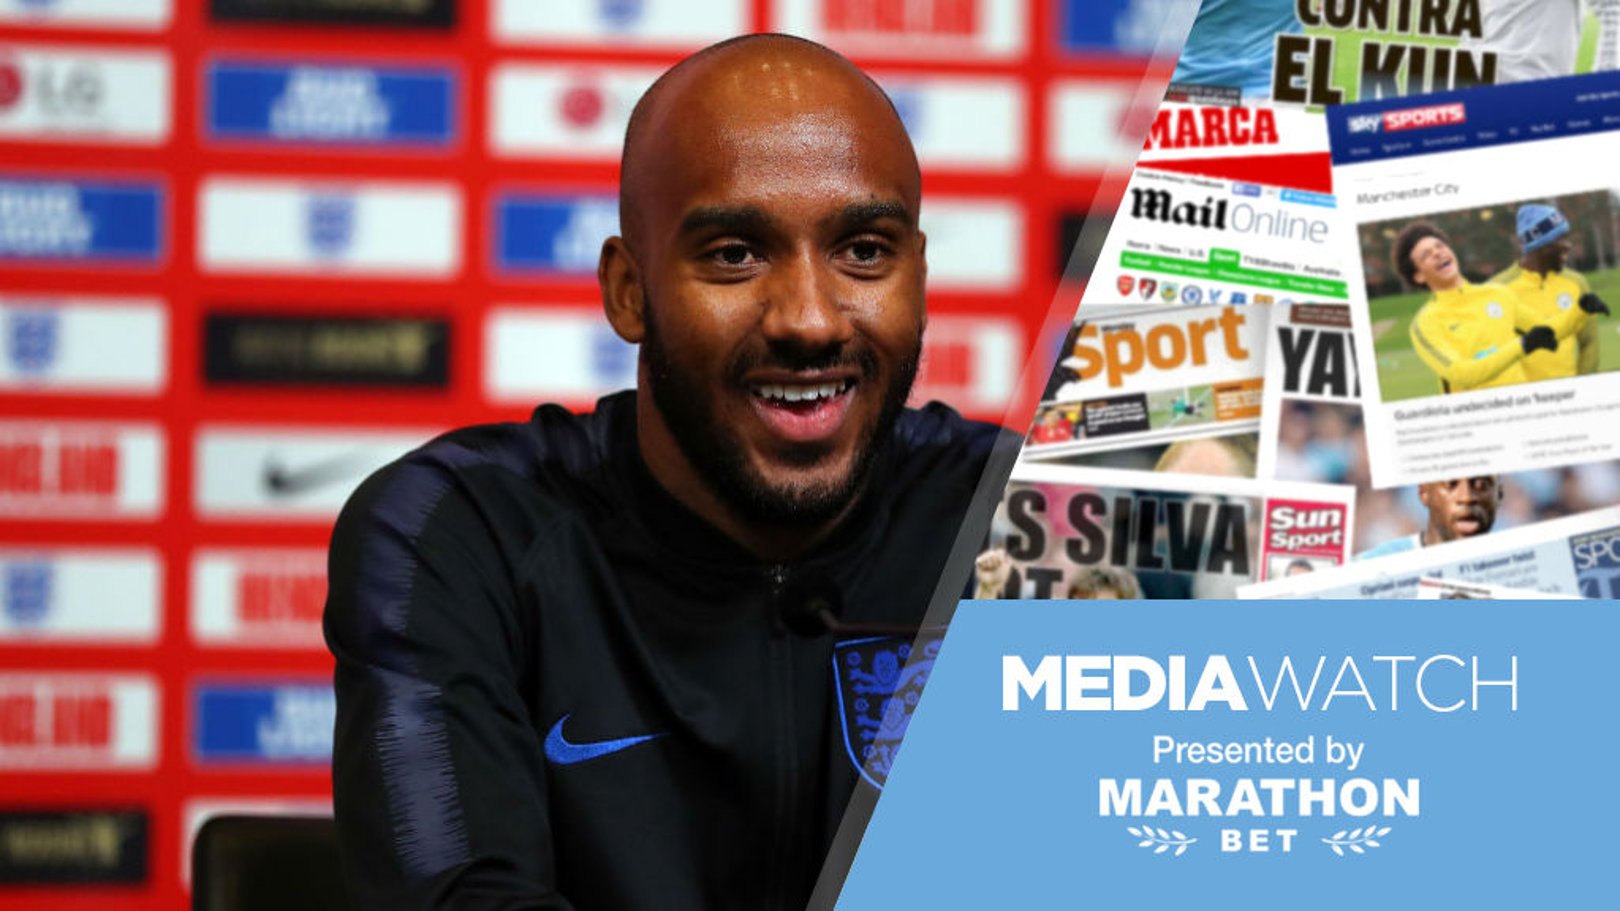 Southgate: Delph is an outstanding player